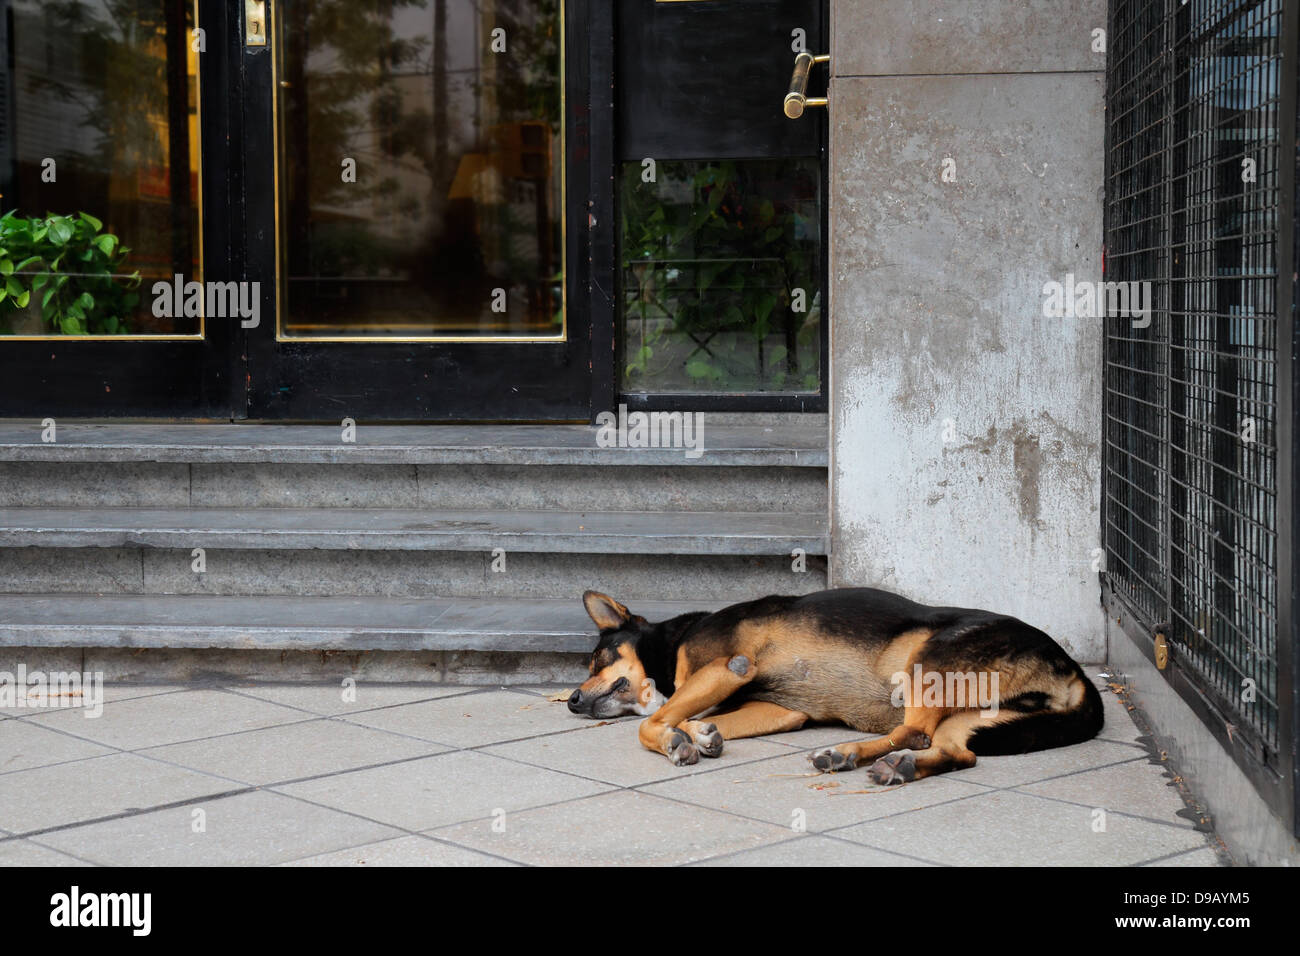 Homeless, stray street dog sleeping in front of a city building Stock Photo